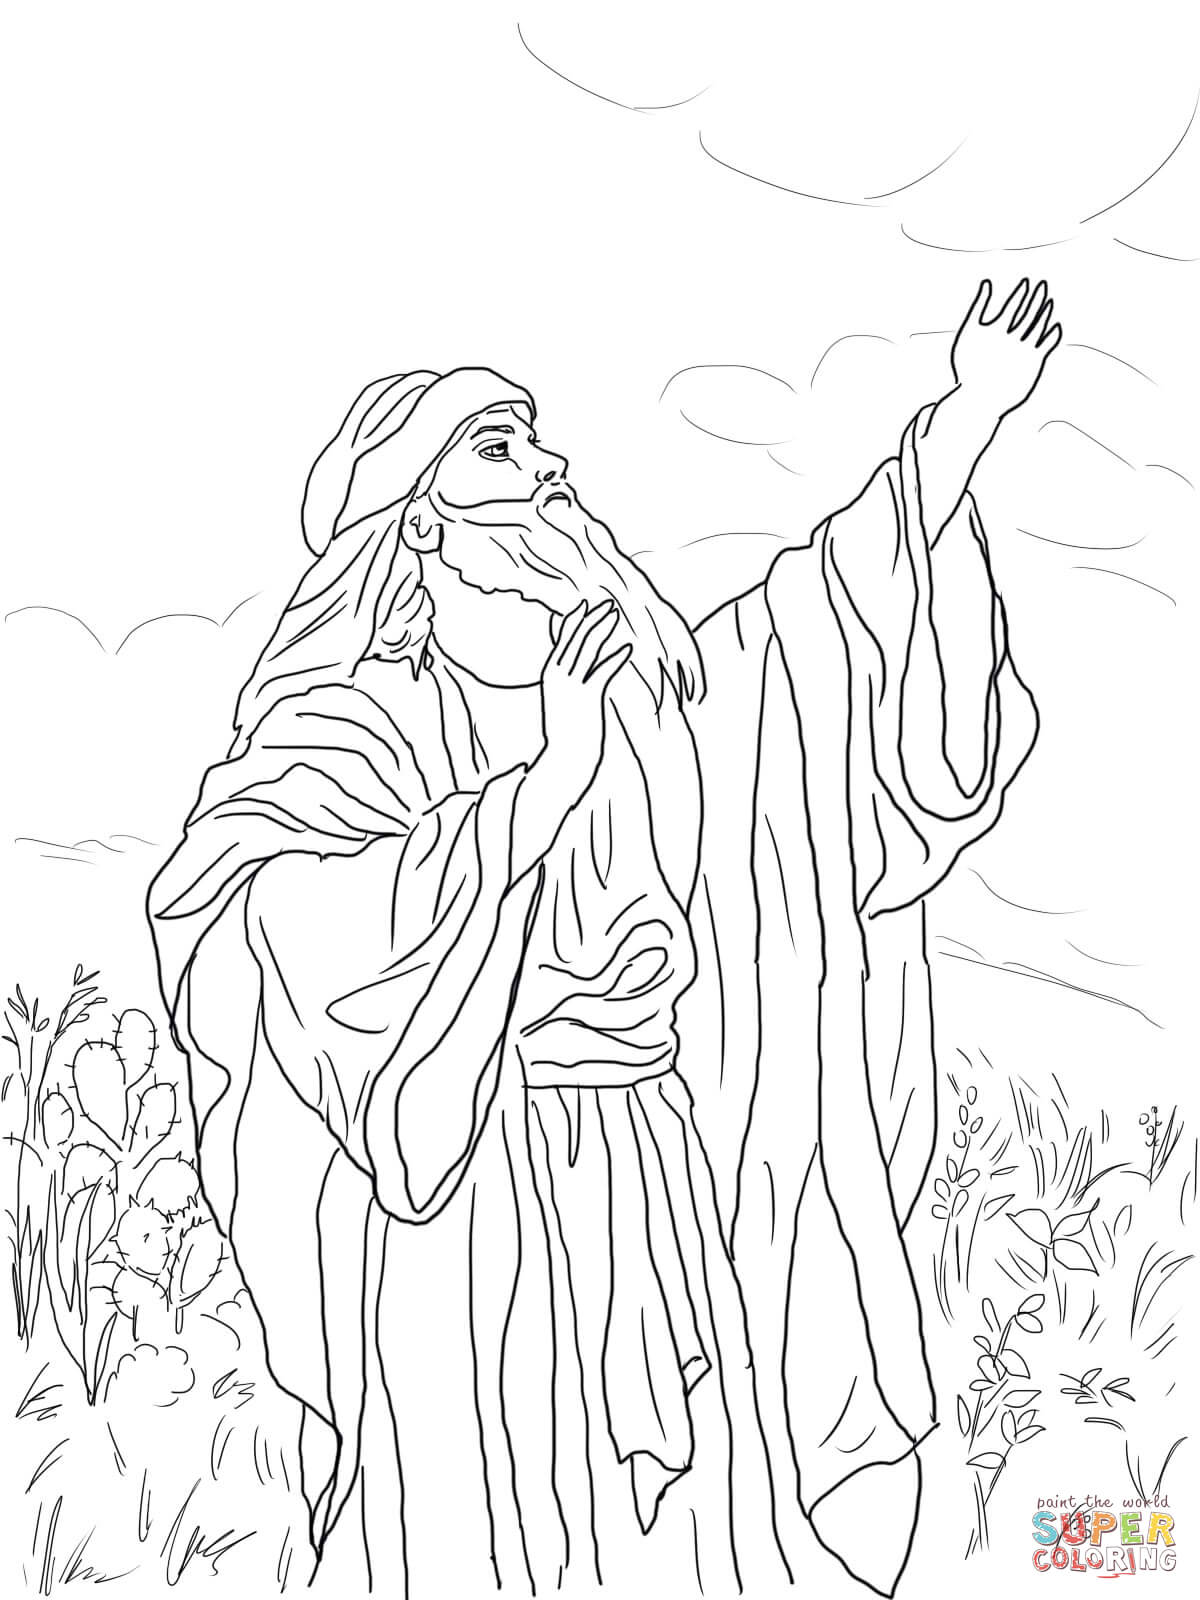 Prophet Isaiah coloring page | Free Printable Coloring Pages